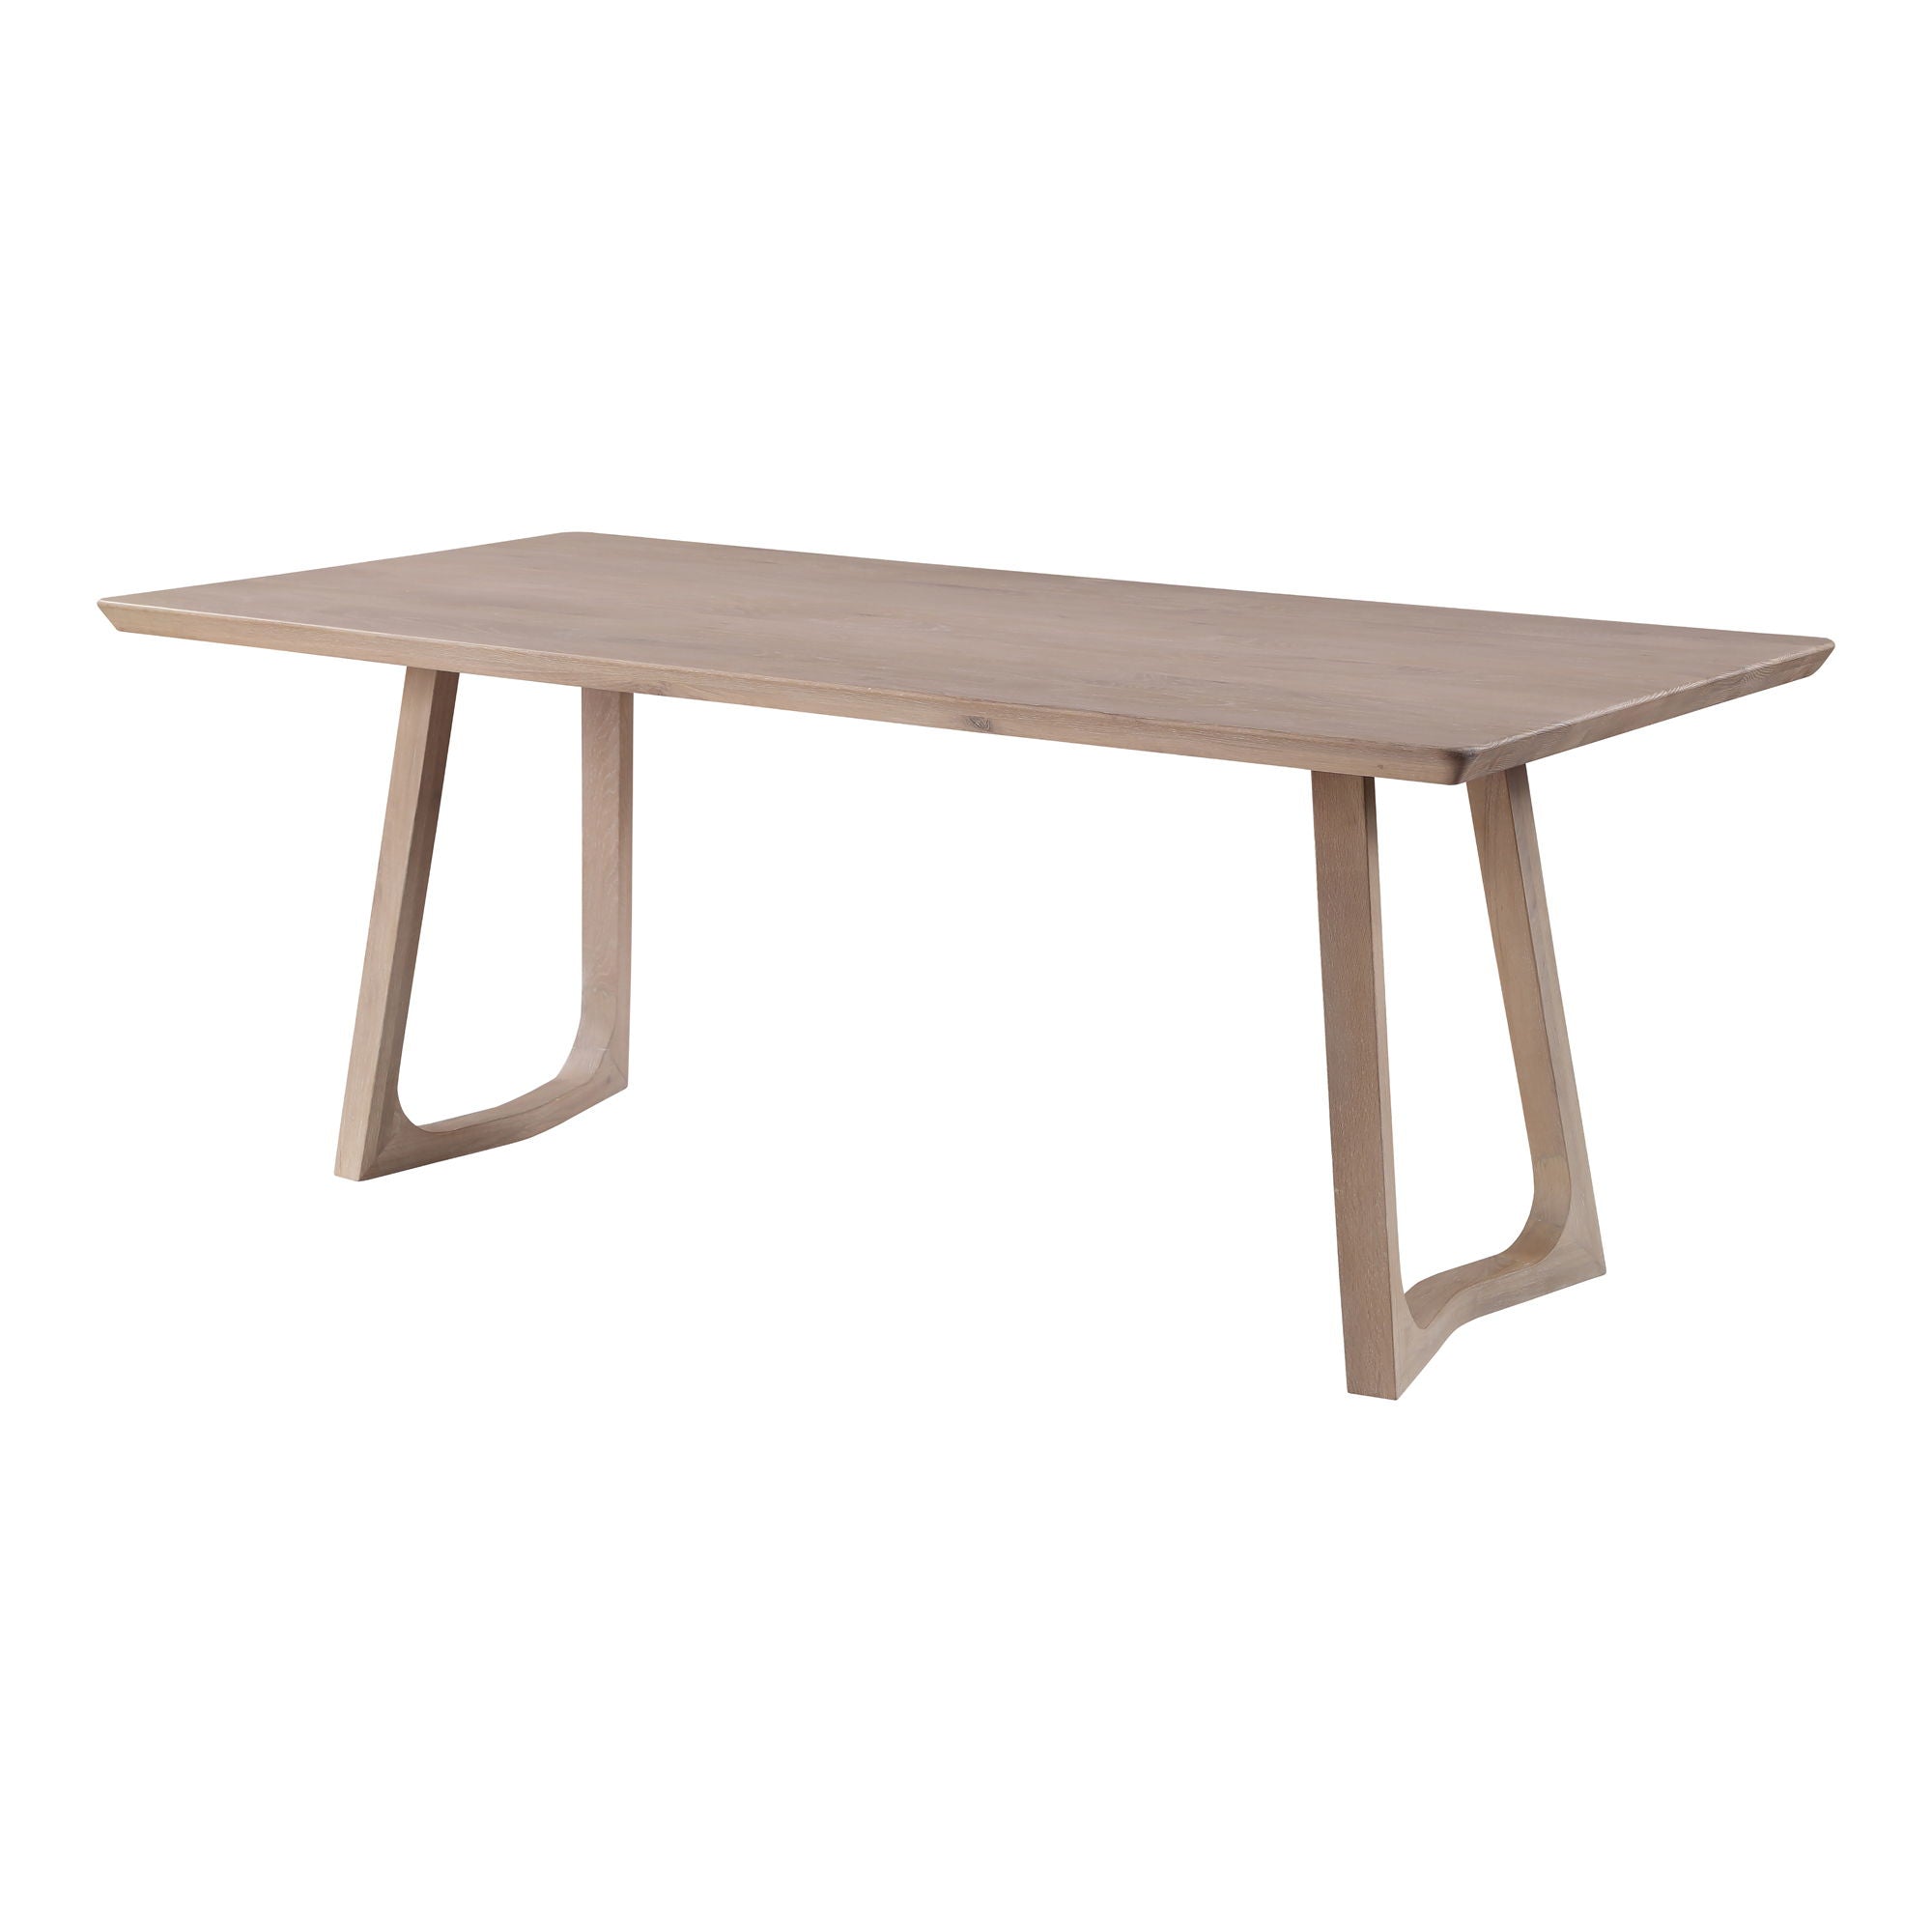 Silas - Dining Table - White Wash